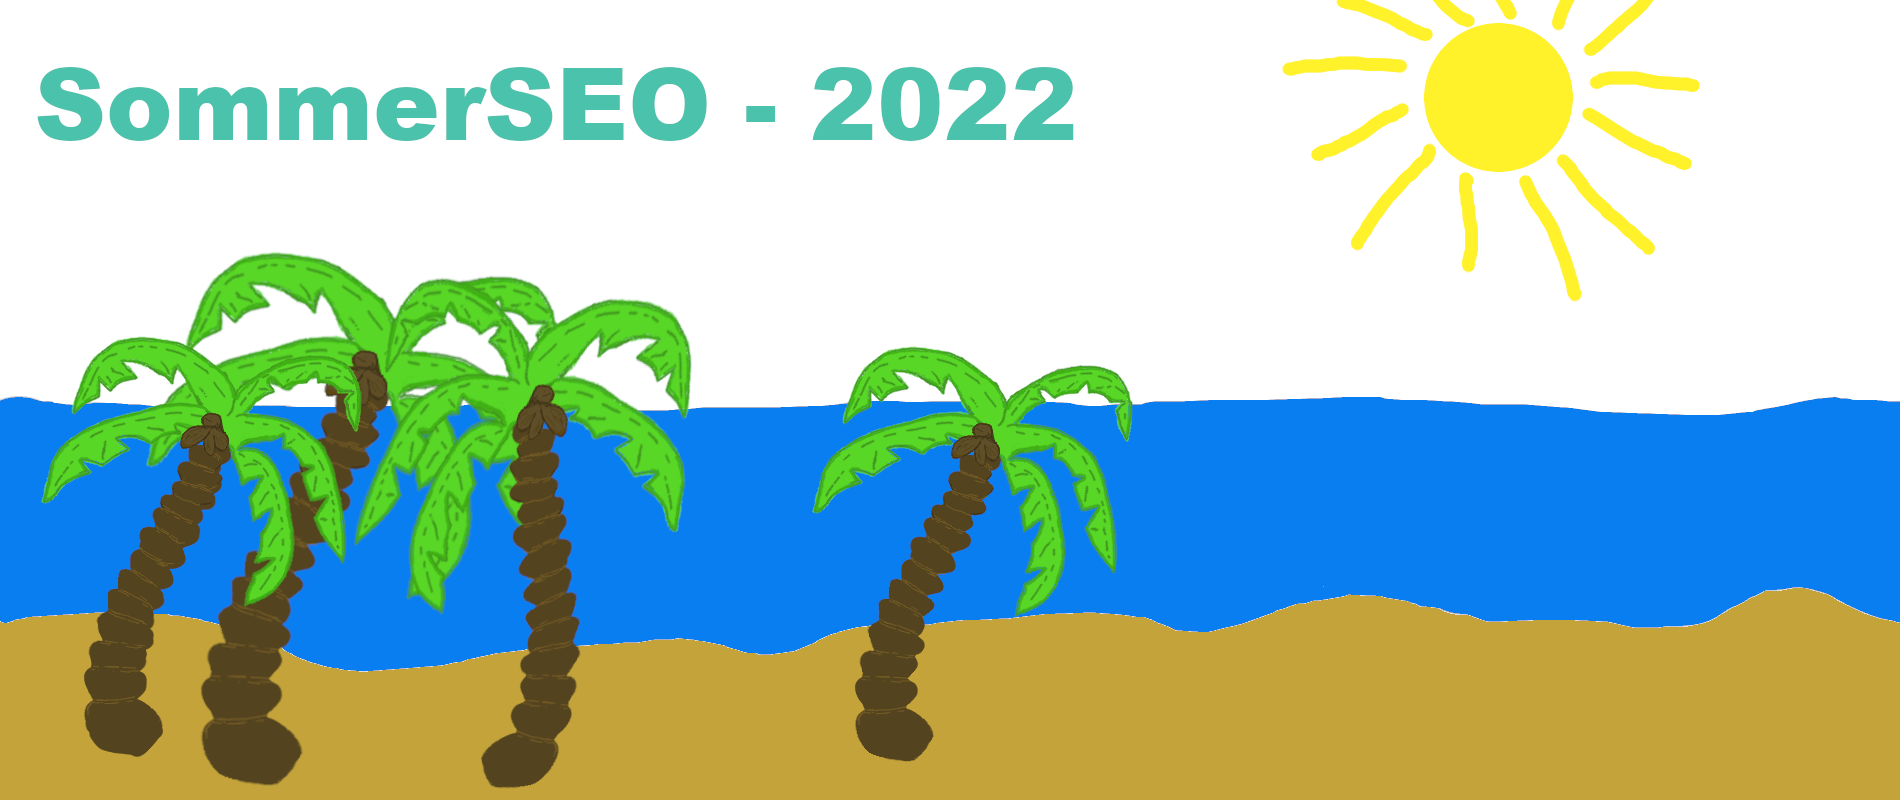 SommerSEO - 2022